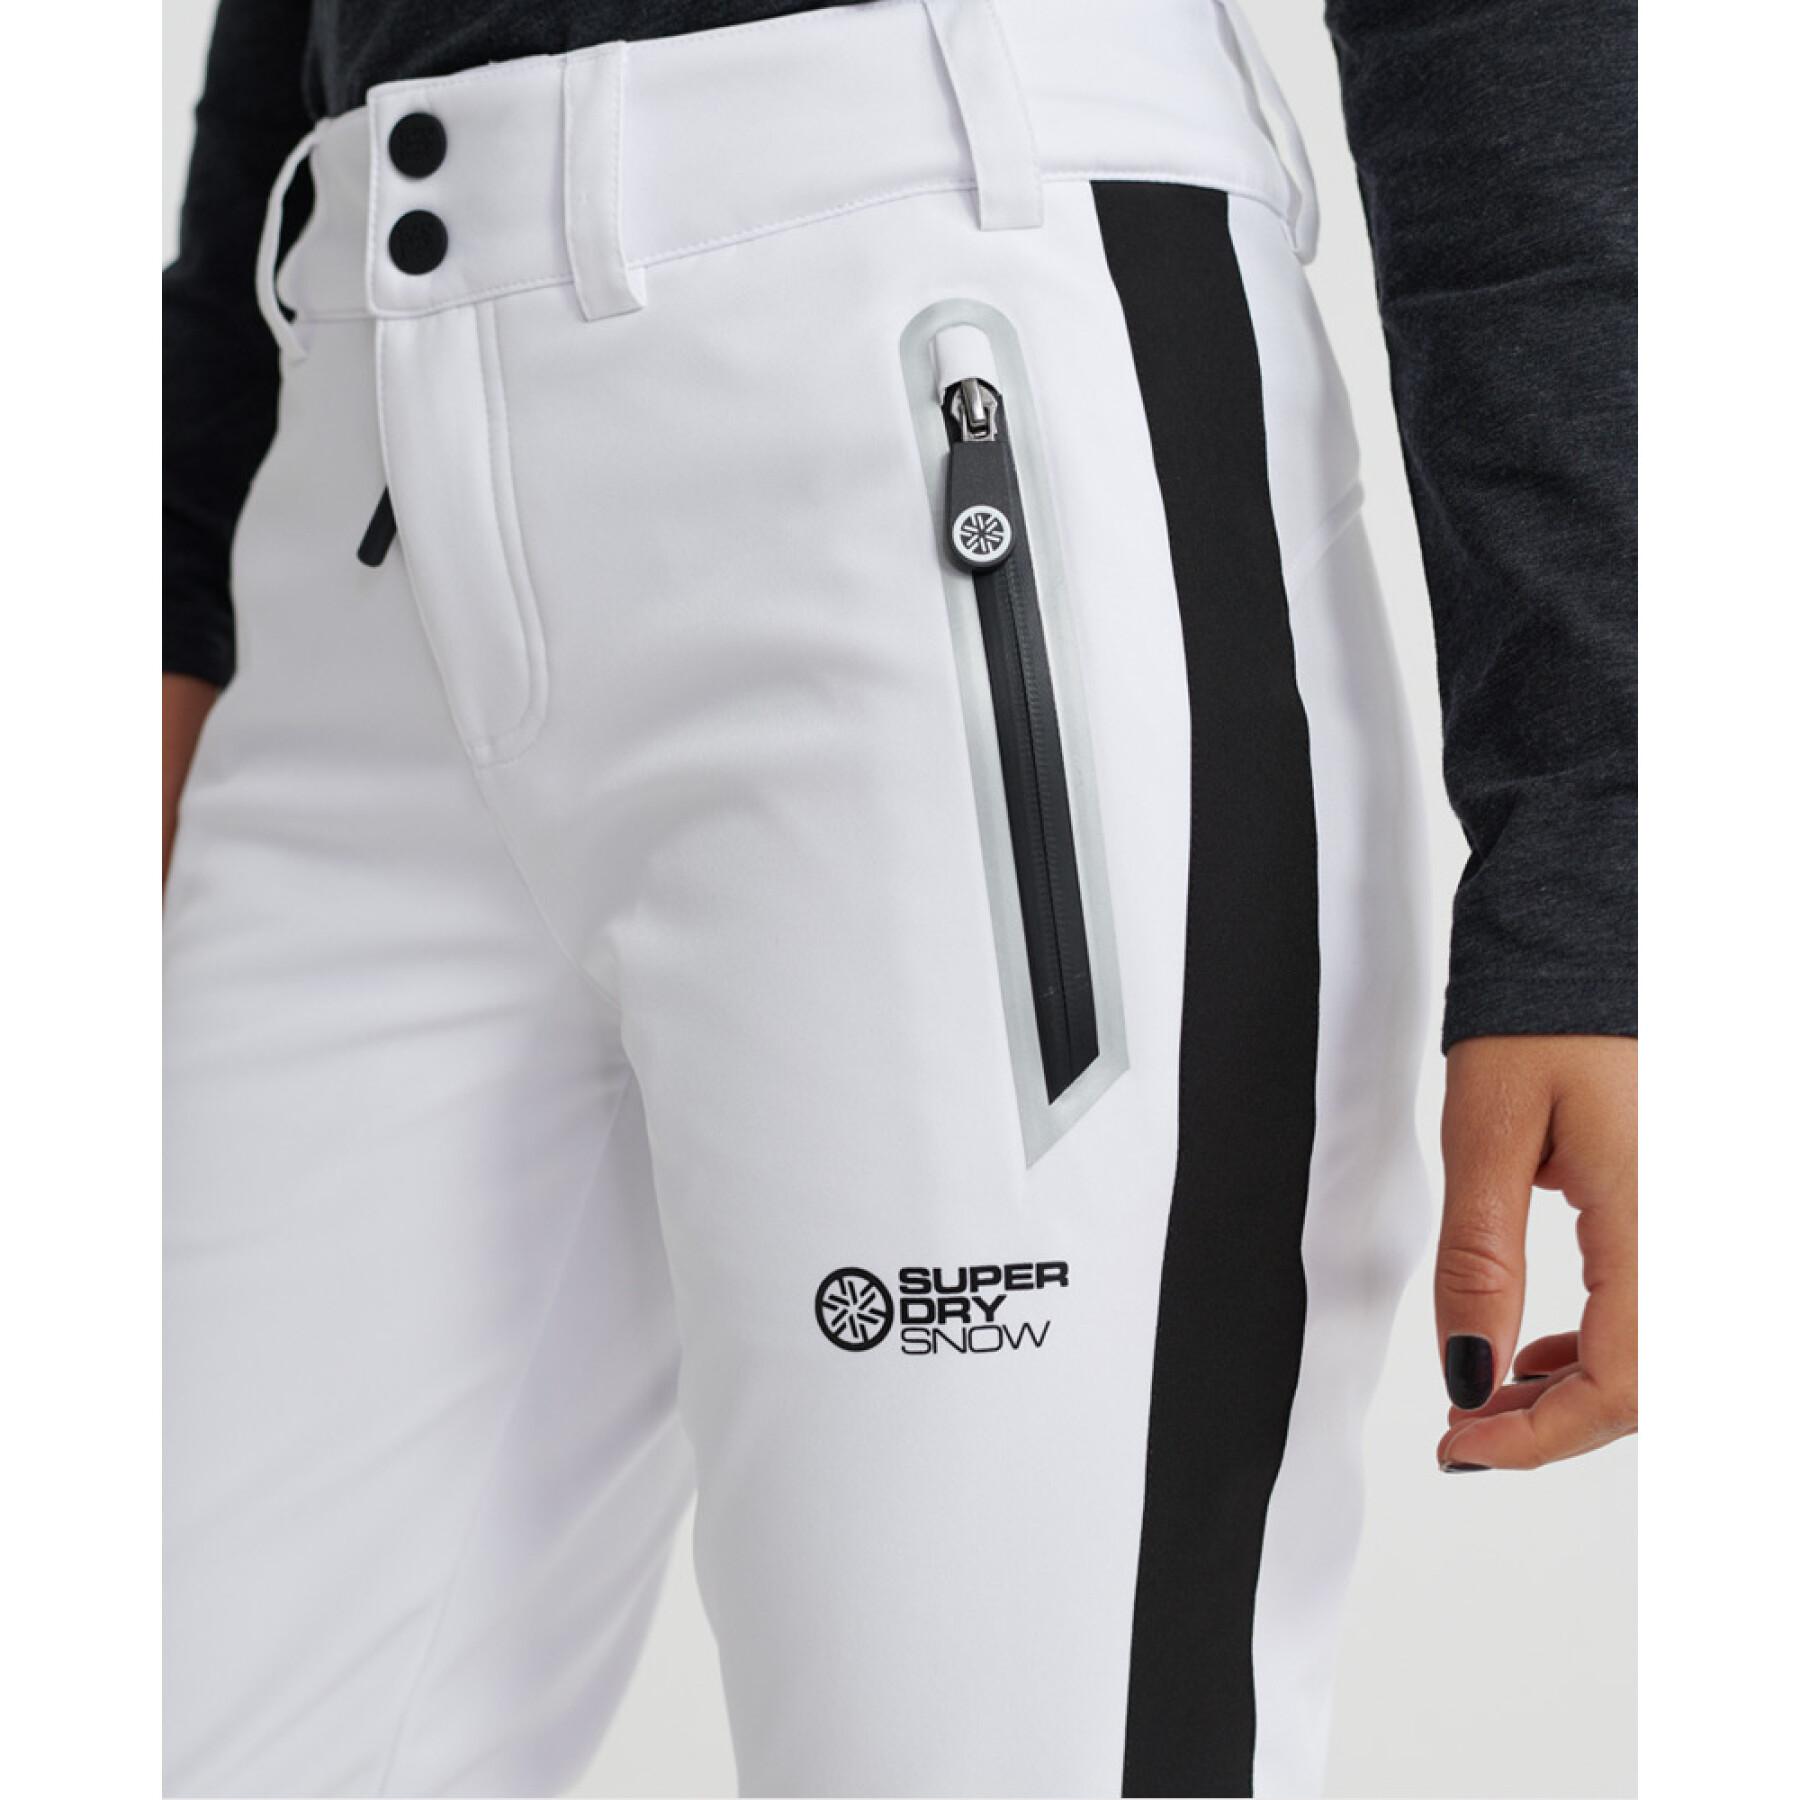 Women's trousers Superdry Ski Carve